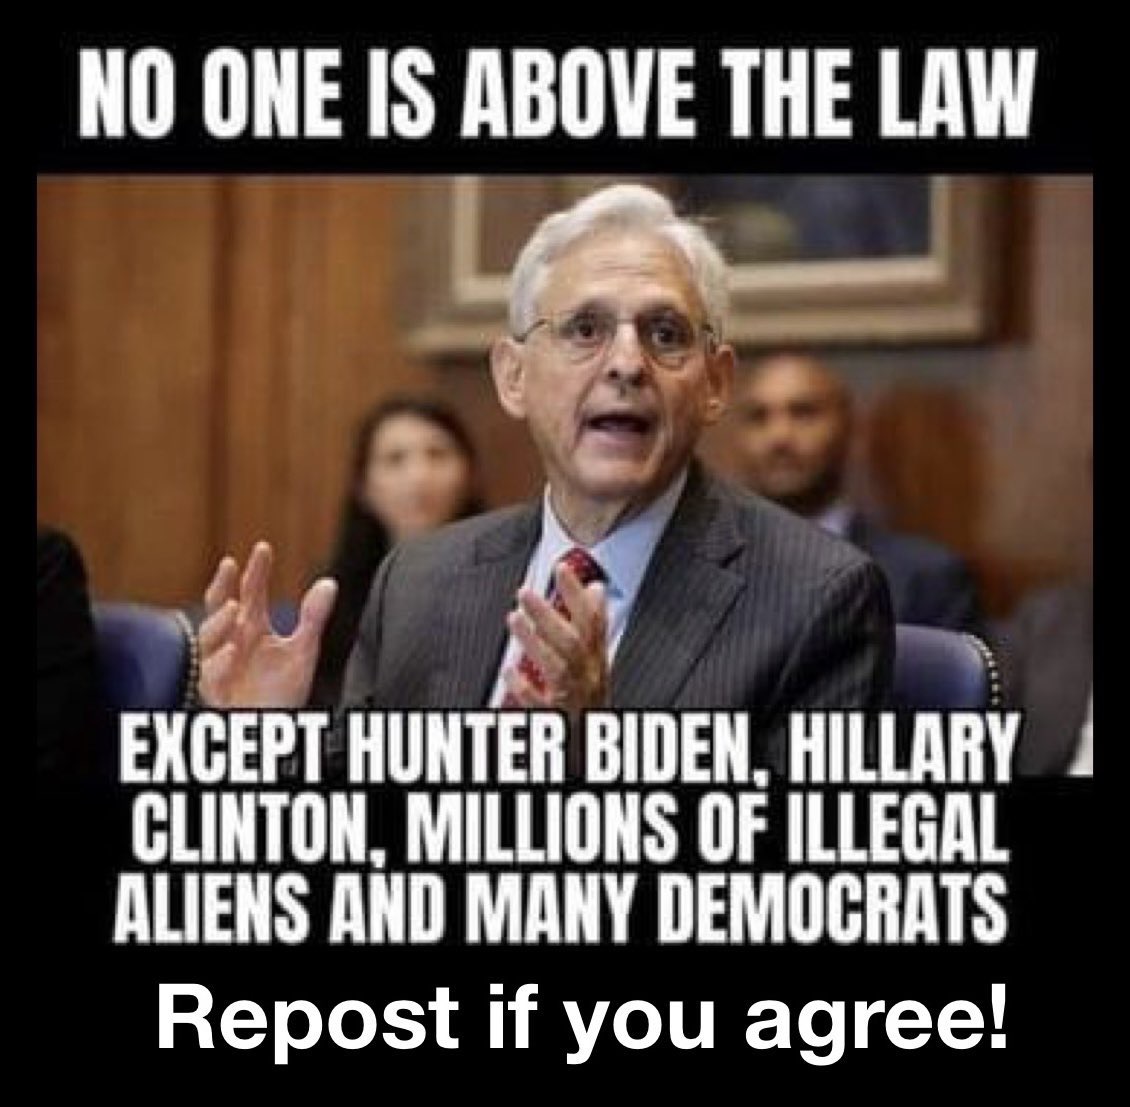 #PeriklesDepot #MAGA #AmericaFirst #Trump2024 🔥 NO ONE IS ABOVE THE LAW! 💥 EXCEPT HUNTER BIDEN. HILLARY GLINTON, MILLIONS OF ILLEGAL ALIENS & MANY DEMOCRATS!